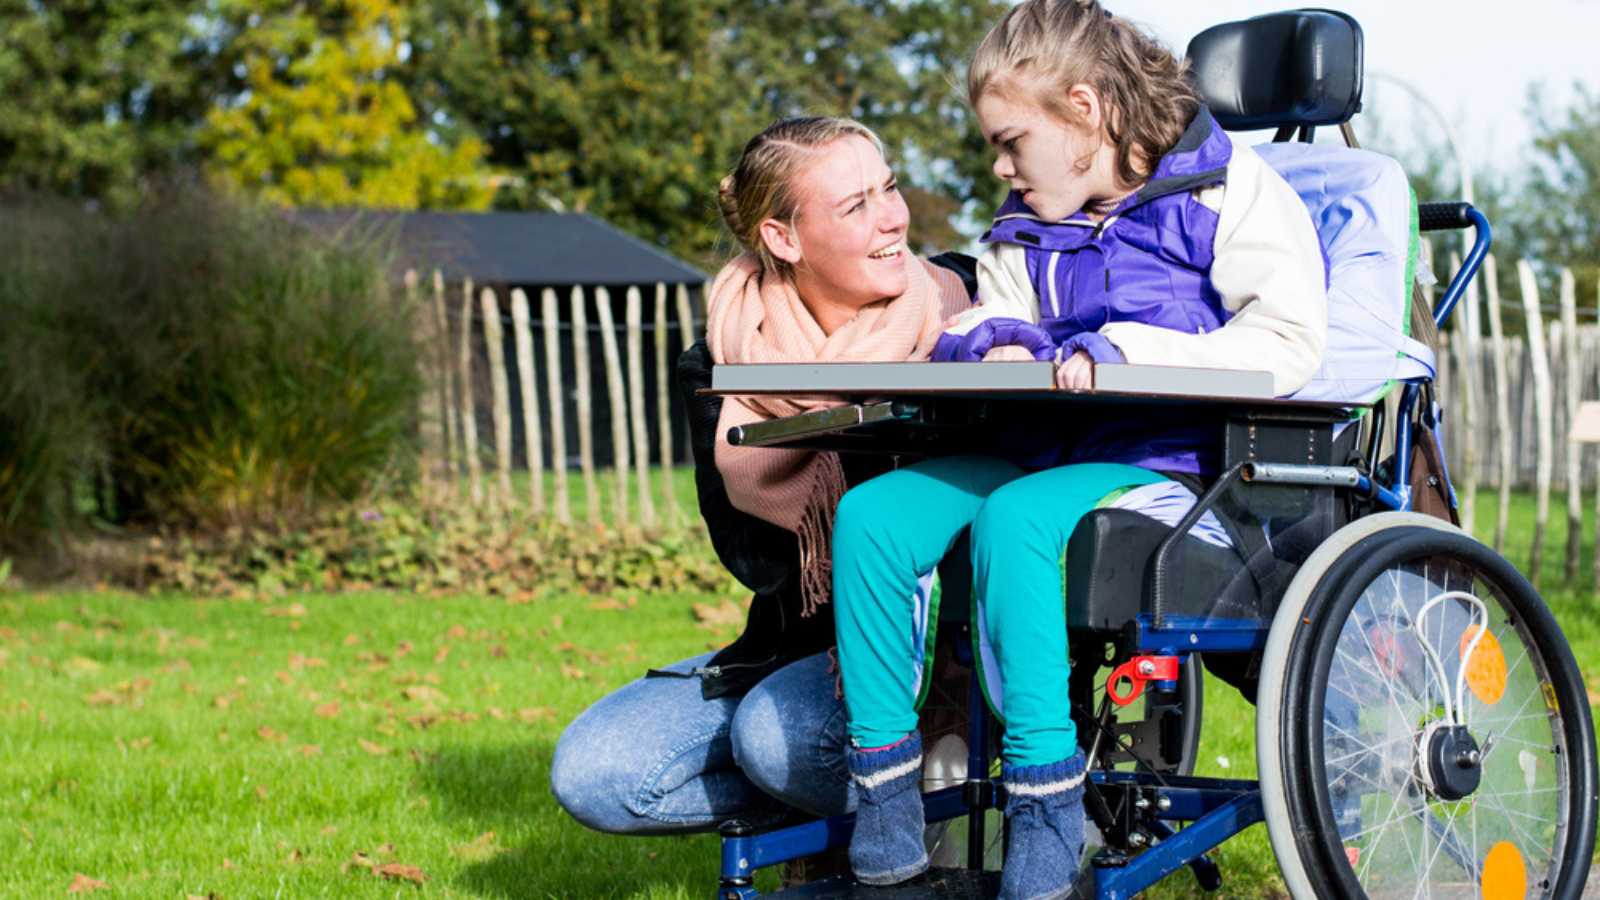 Disabled child in a wheelchair relaxing outside with a care assistant / Working with disability